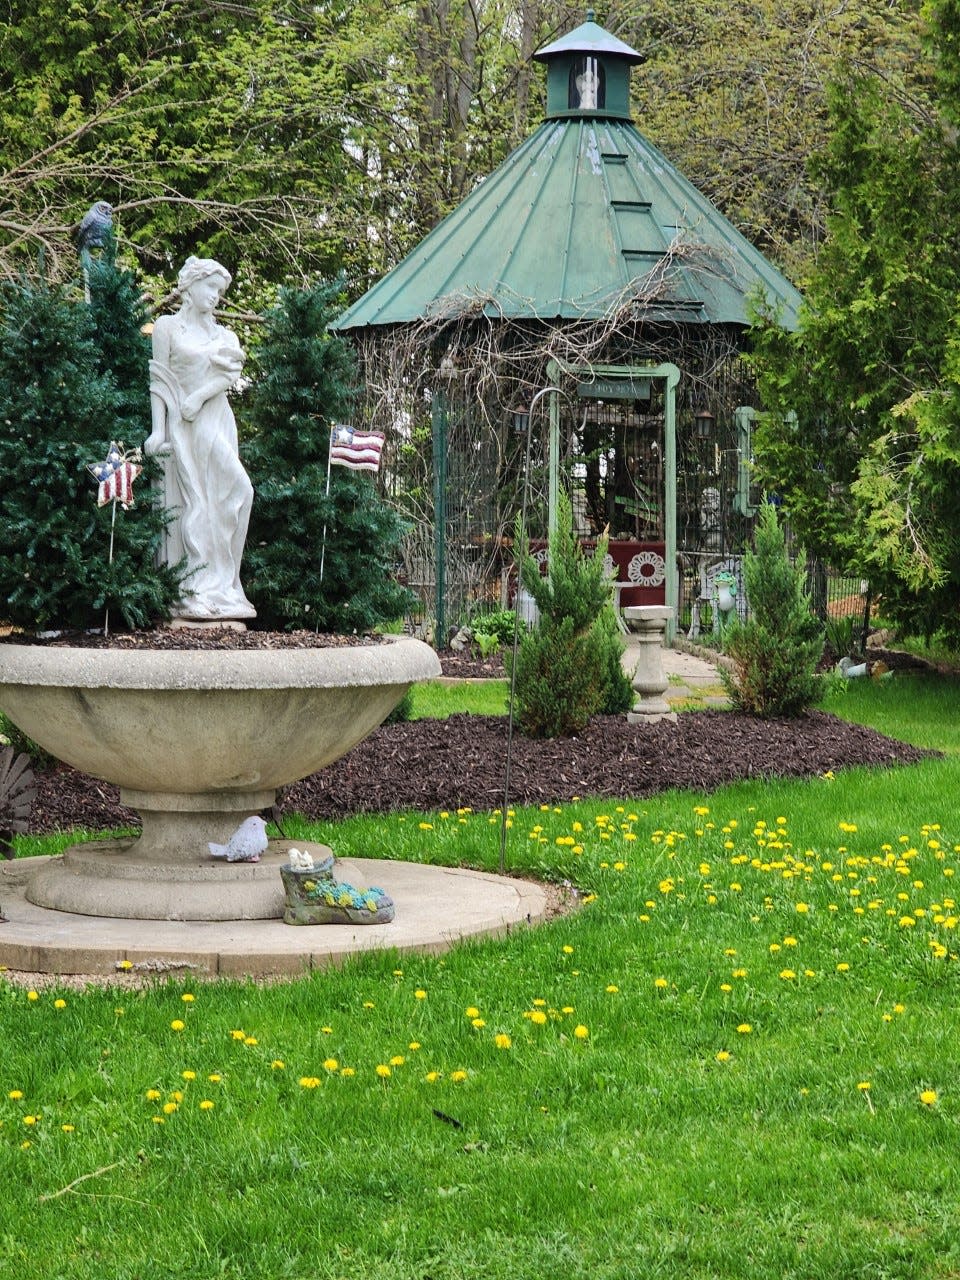 The Random Lake Garden Tour will have food, drinks and entertainment in the Town of Fredonia. The four featured gardens on July 8 are also in Random Lake and Adell.